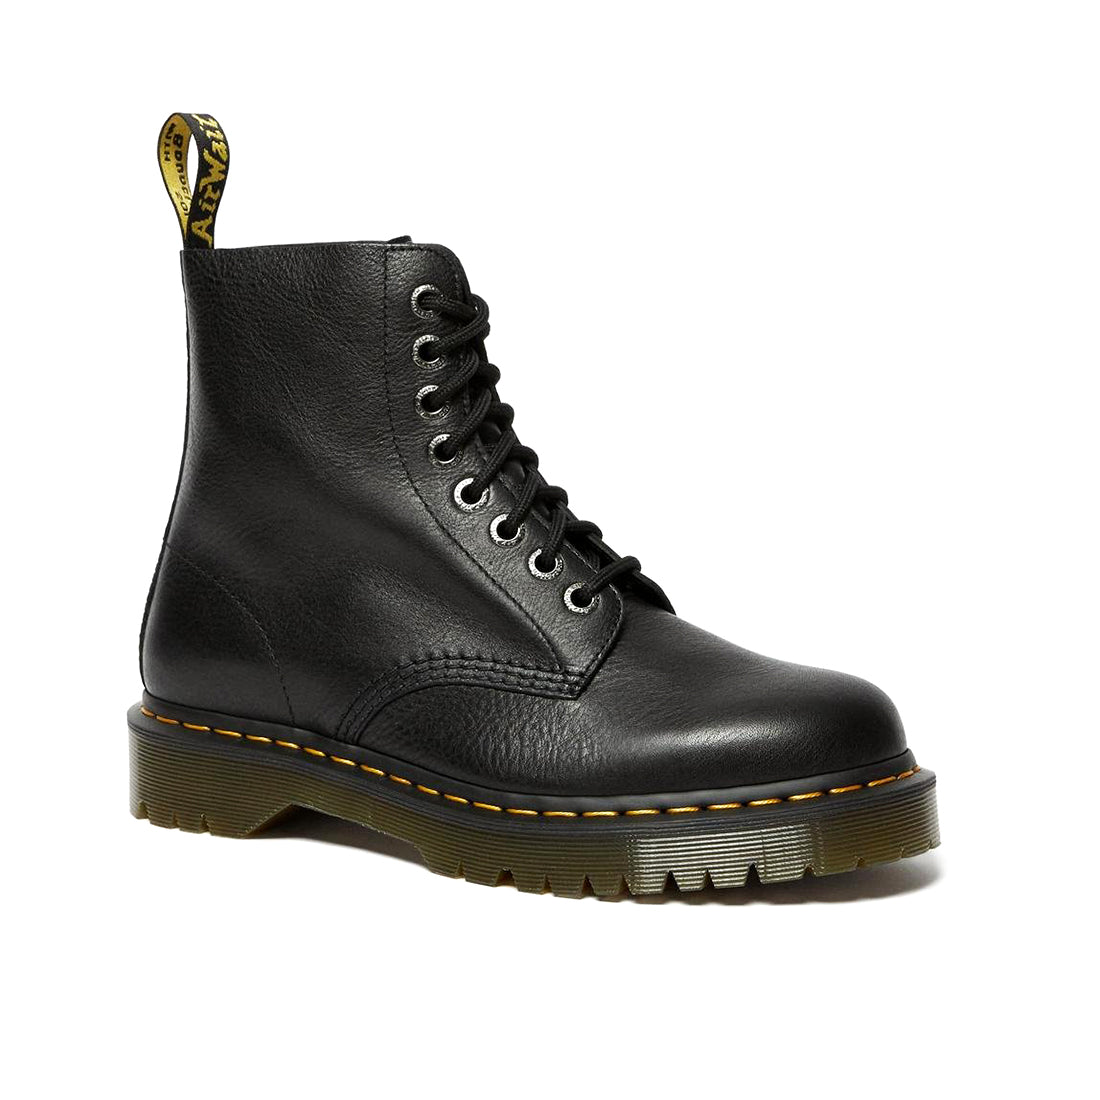 dr martens 1460 on chunky Bex sole